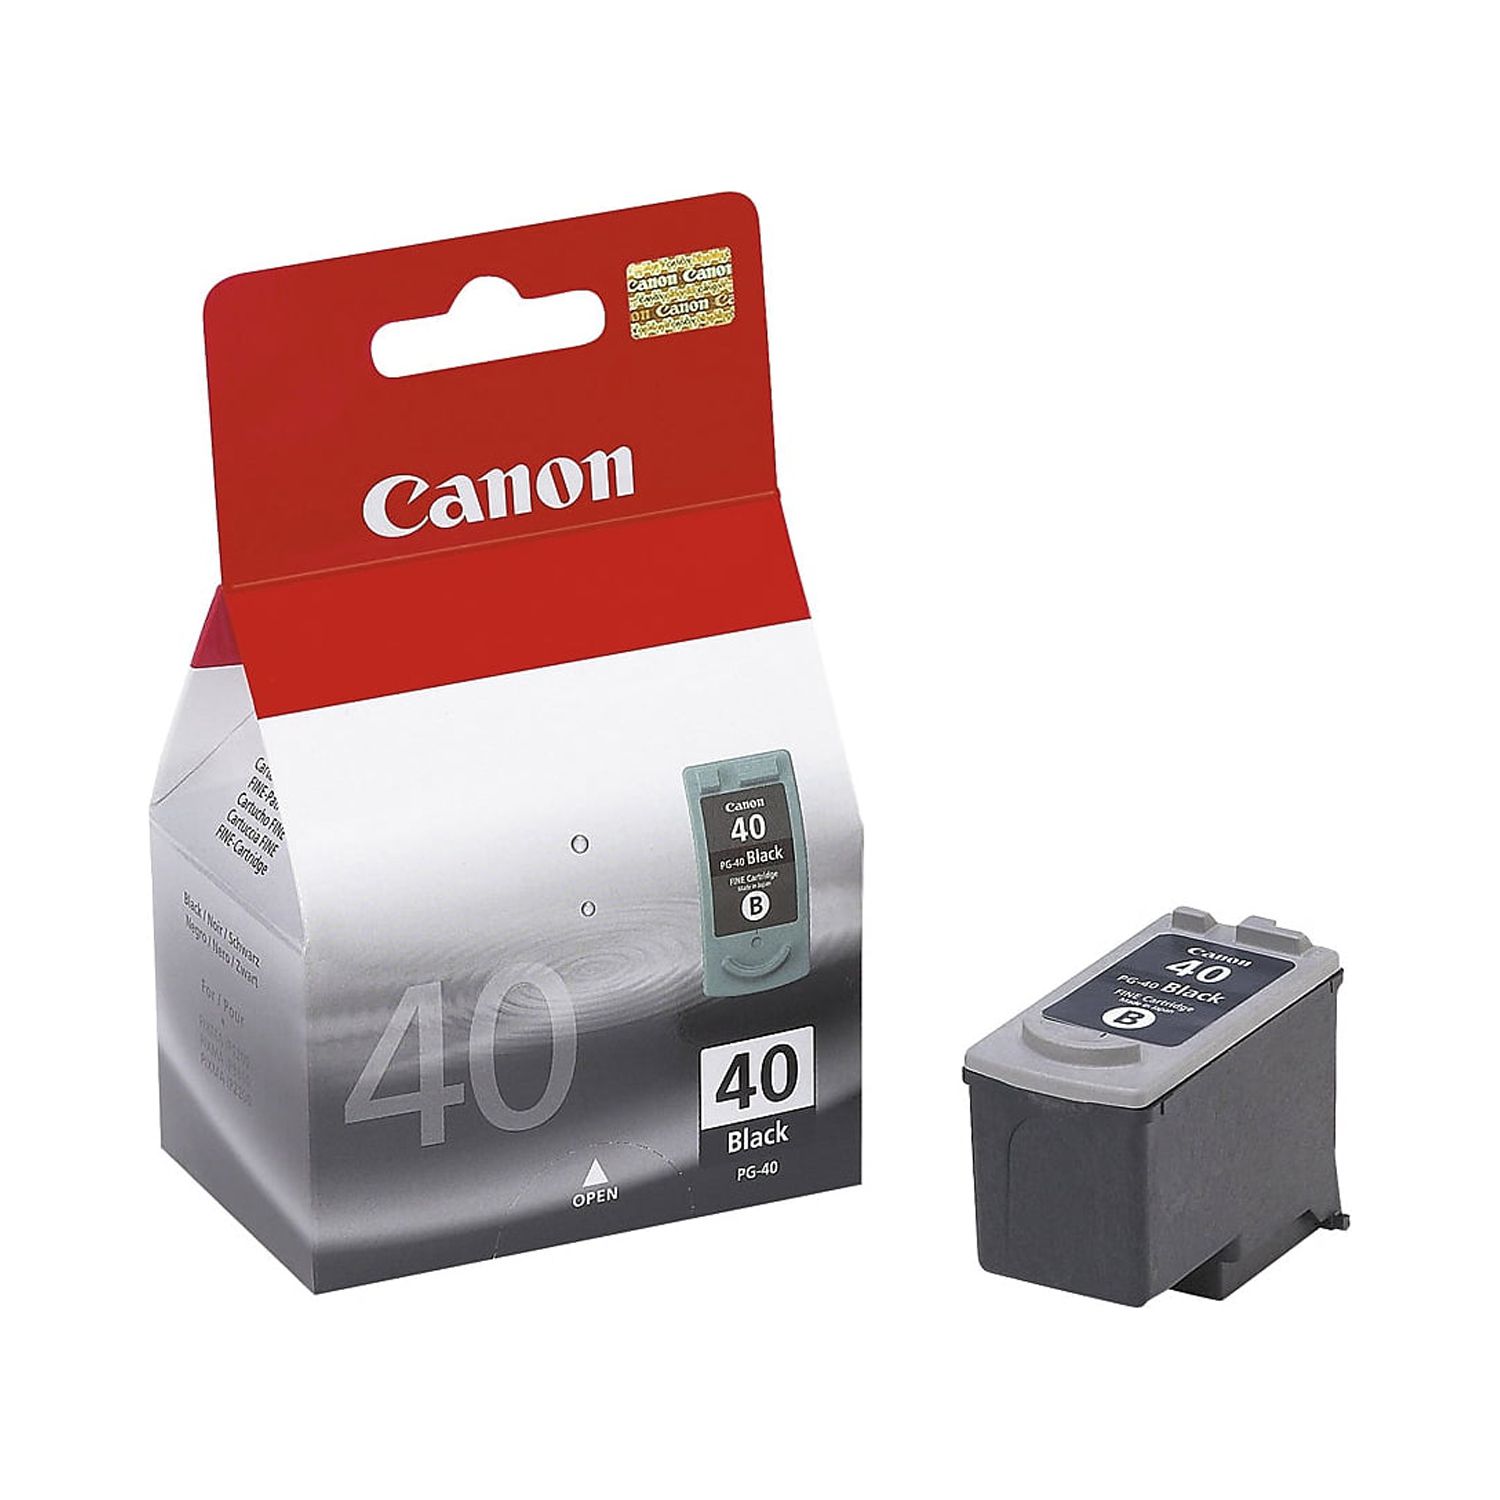 Canon PG-40 Ink Cartridge - image 2 of 5